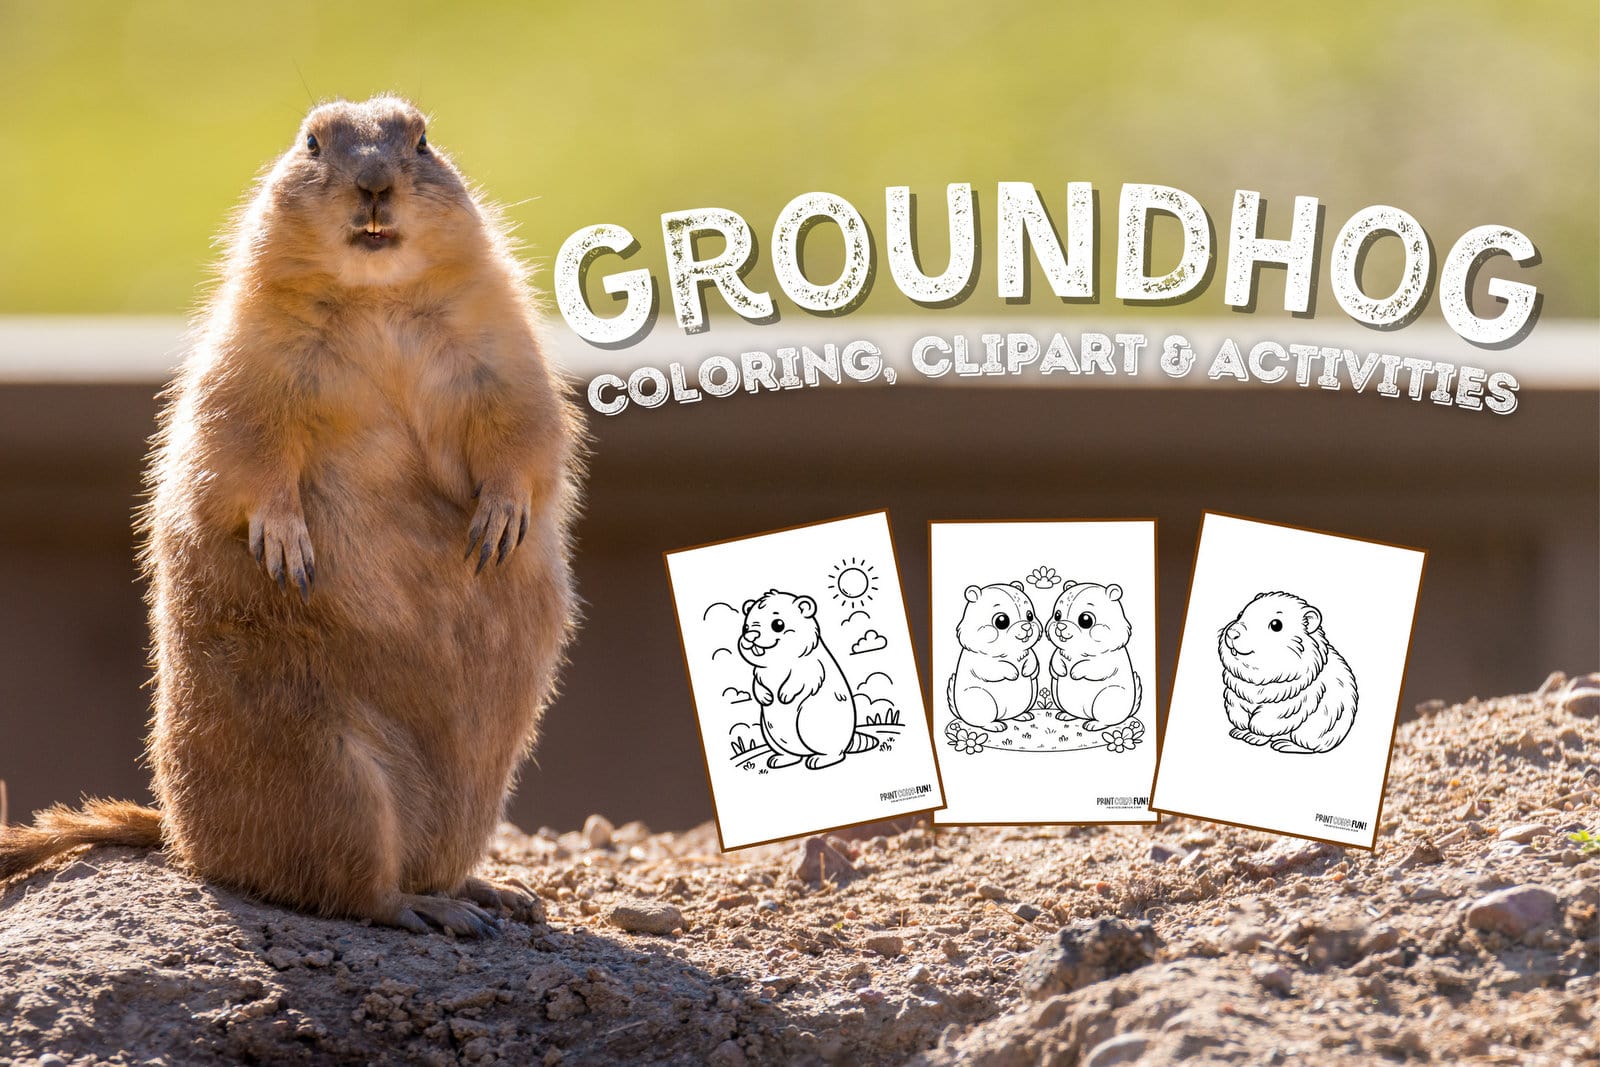 Groundhog woodchuck coloring page clipart activities from PrintColorFun com